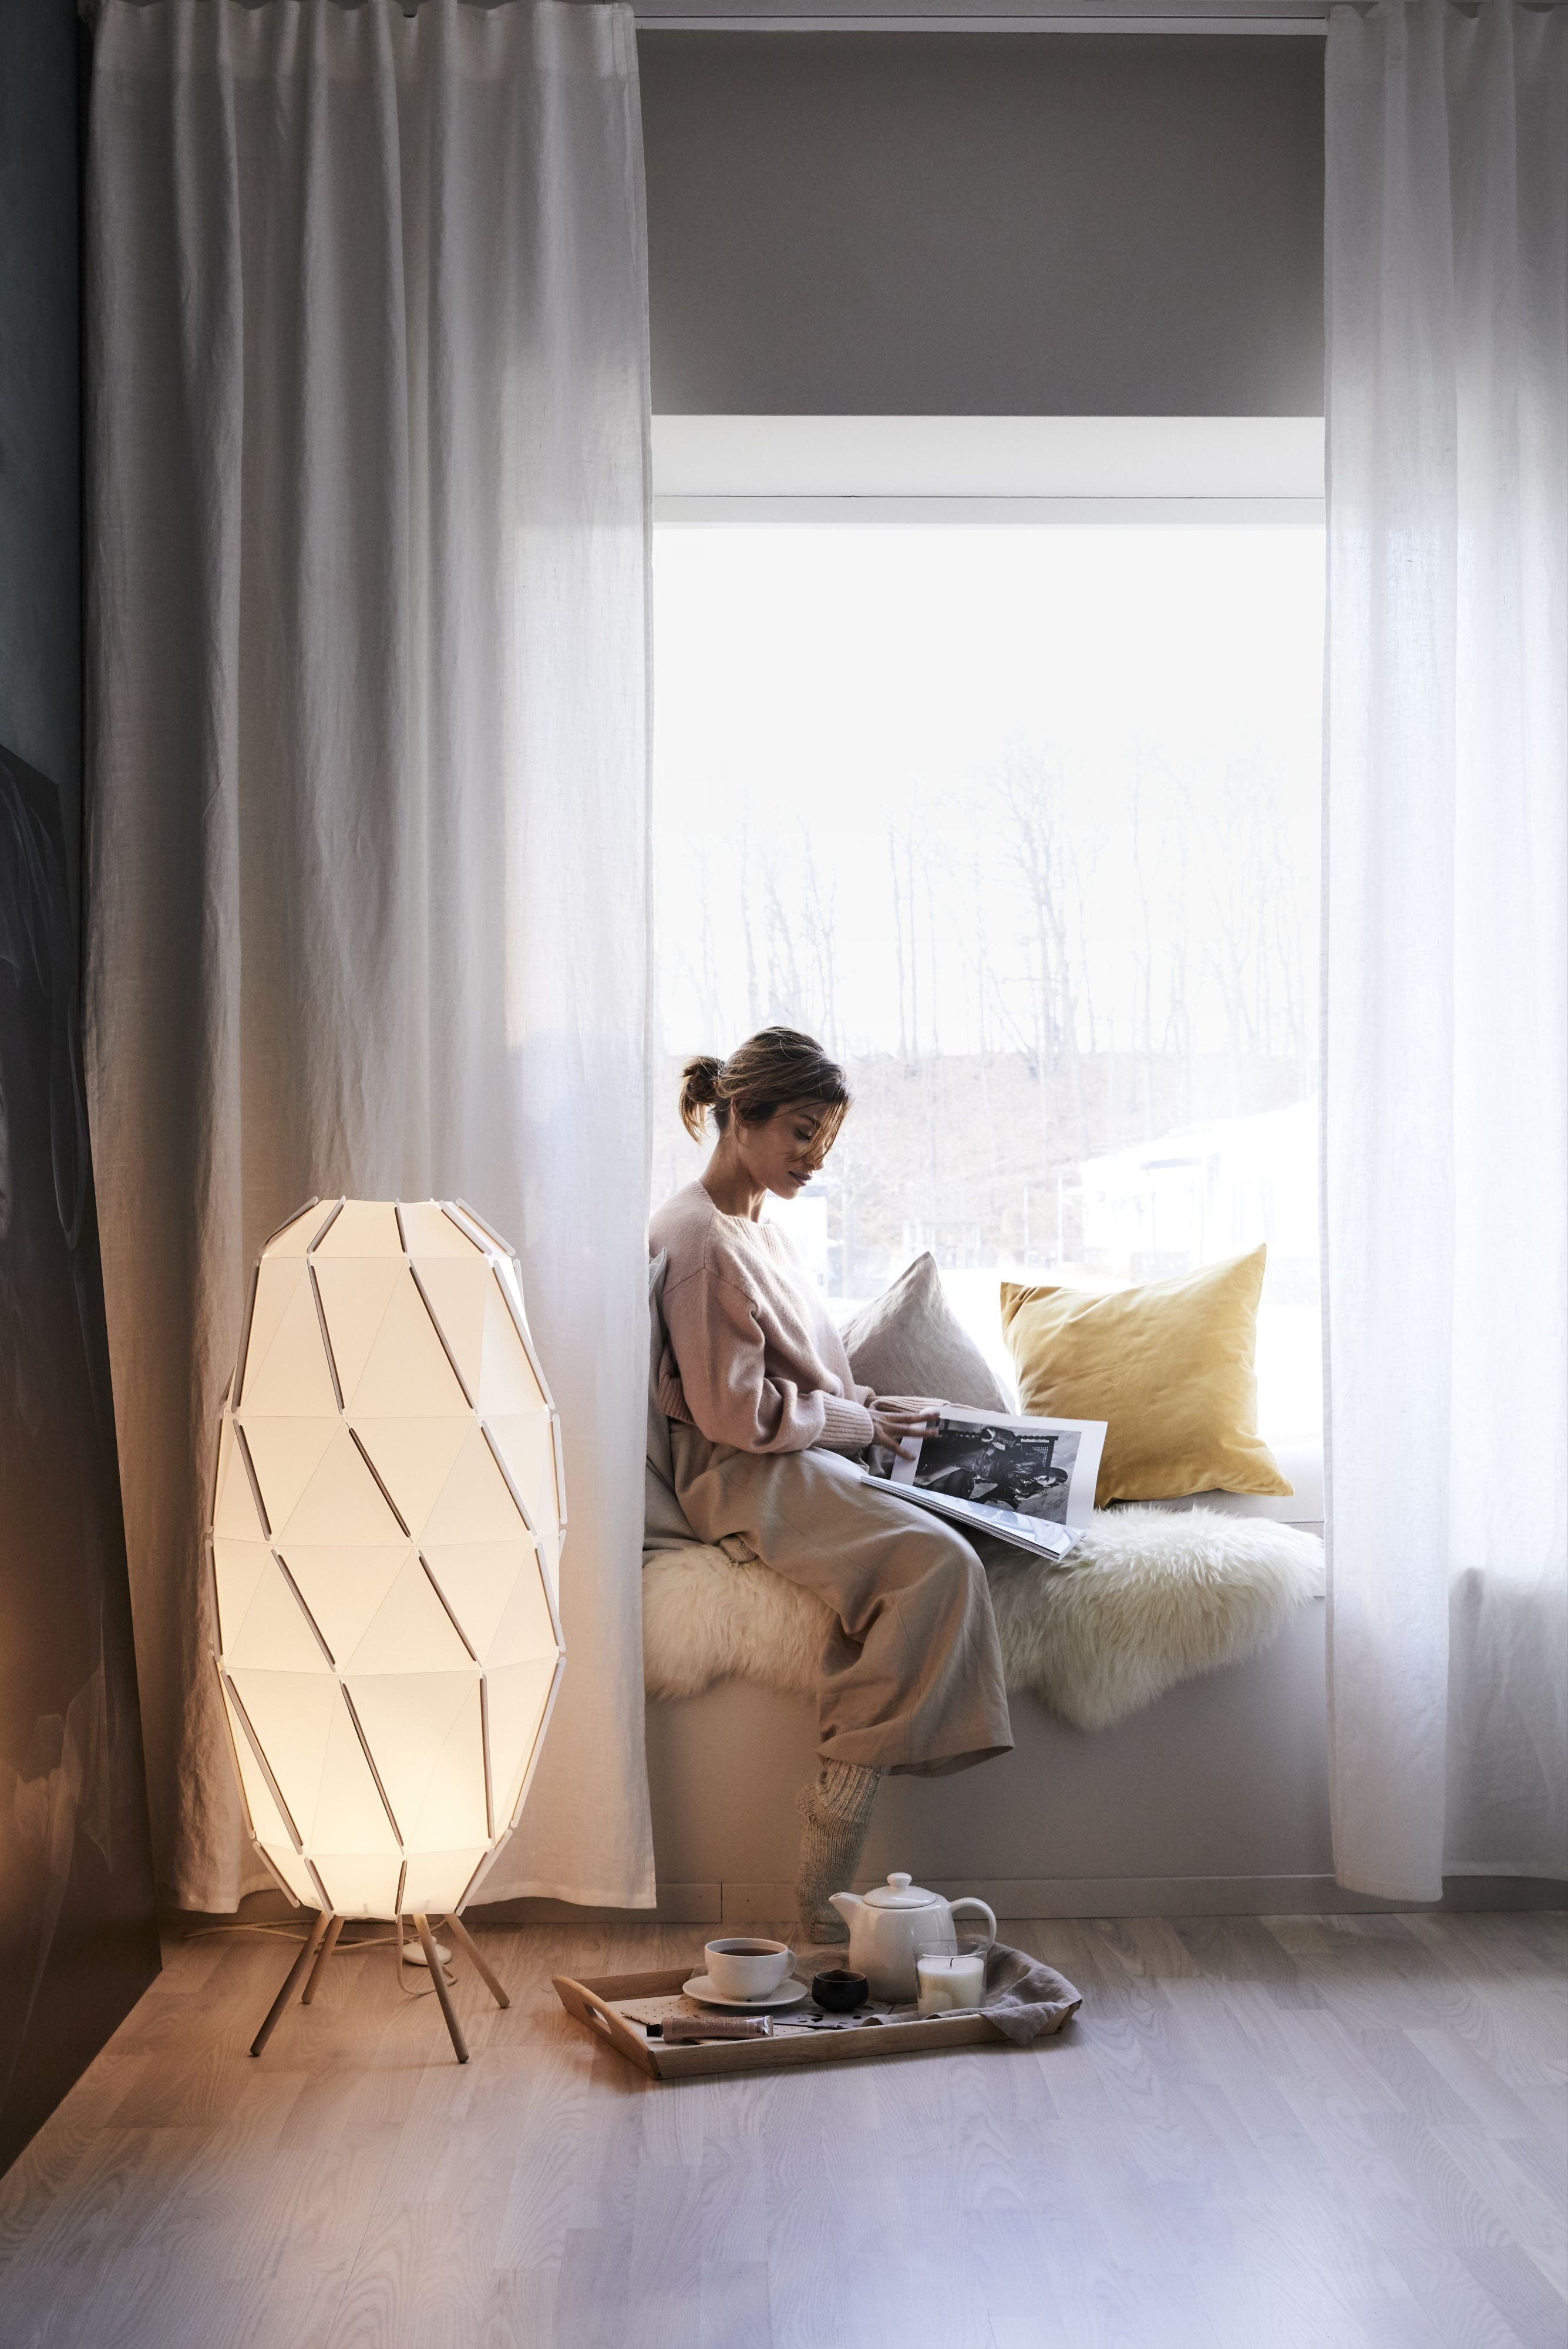 The Sjpenna Floor Lamp Gives Any Room A Warm Glow Creating throughout proportions 2670 X 4000